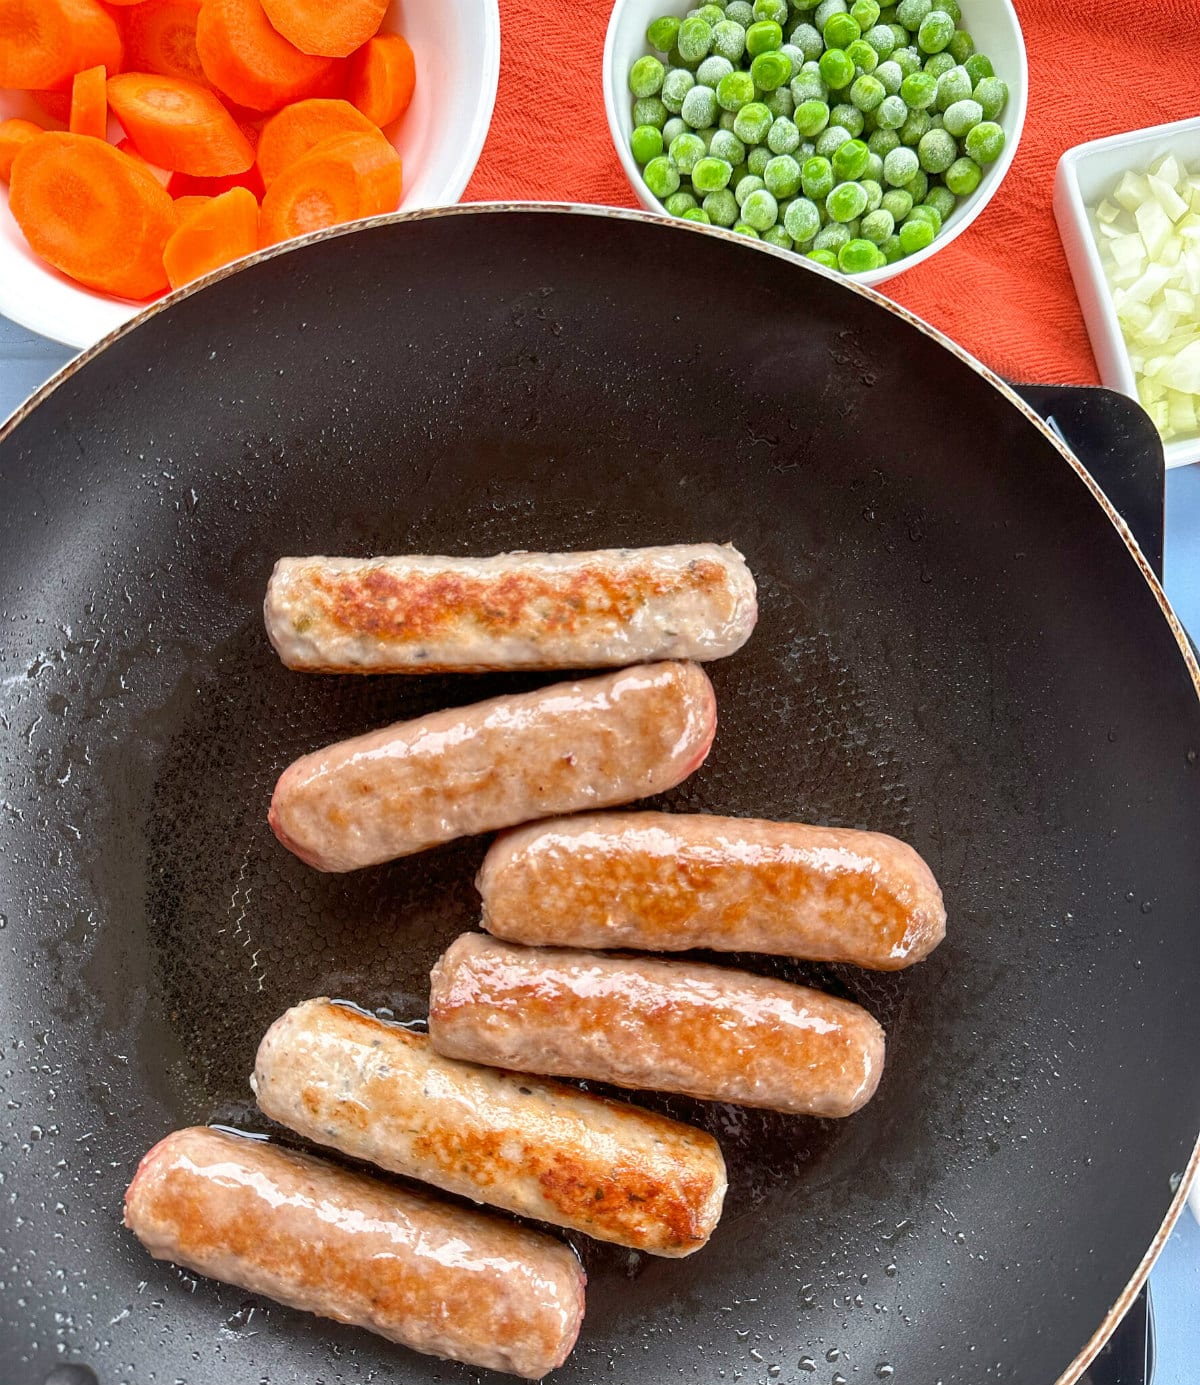 Frying six sausages in a frying pan with bowls of carrots, peas and onions waiting to go in